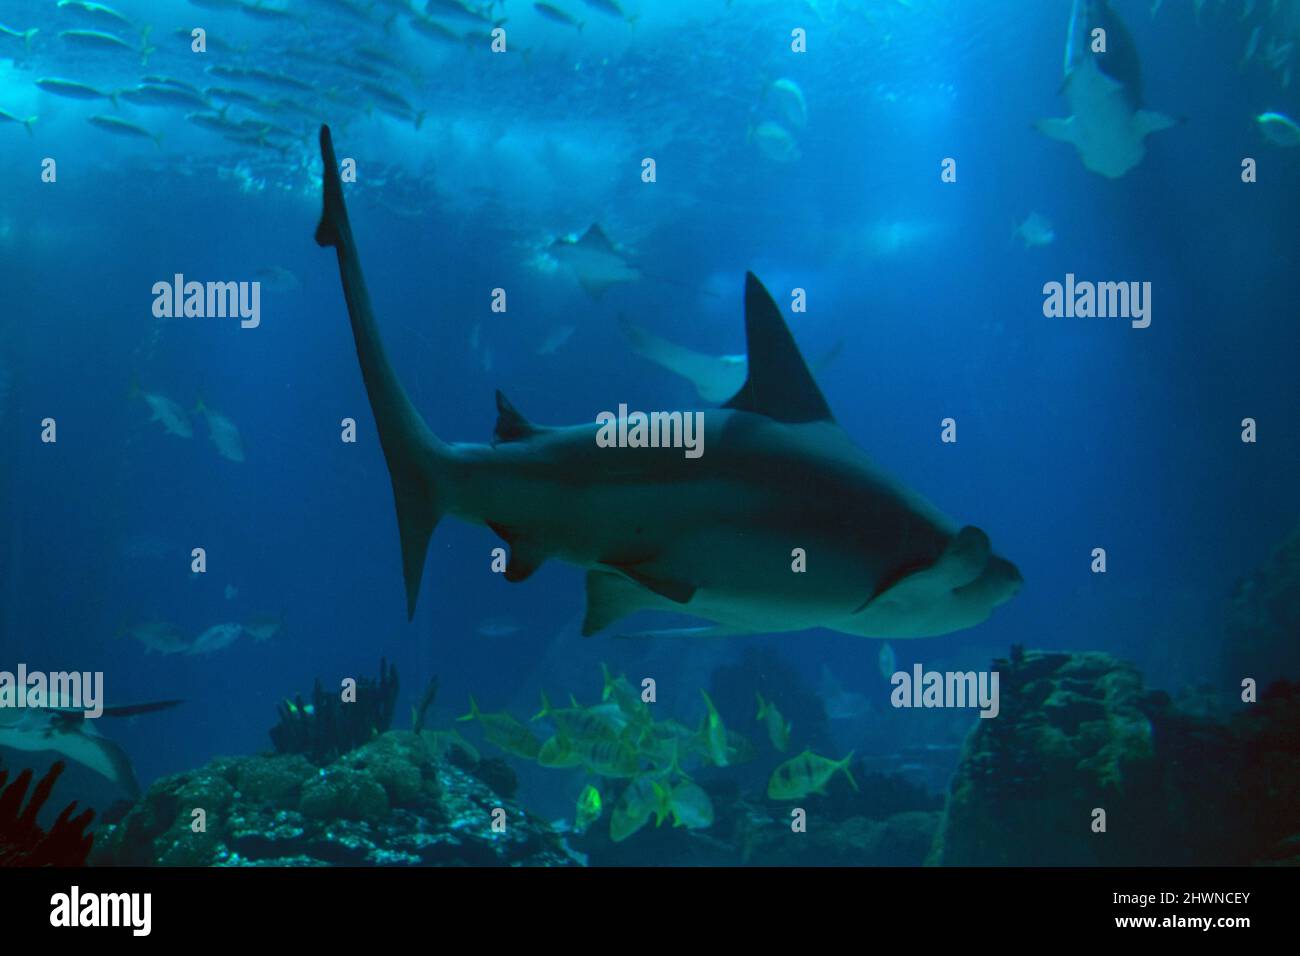 The sandbar shark (Carcharhinus plumbeus) species of requiem shark, part of the family Carcharhinidae, native to the Atlantic Ocean and Indo-Pacific. Stock Photo